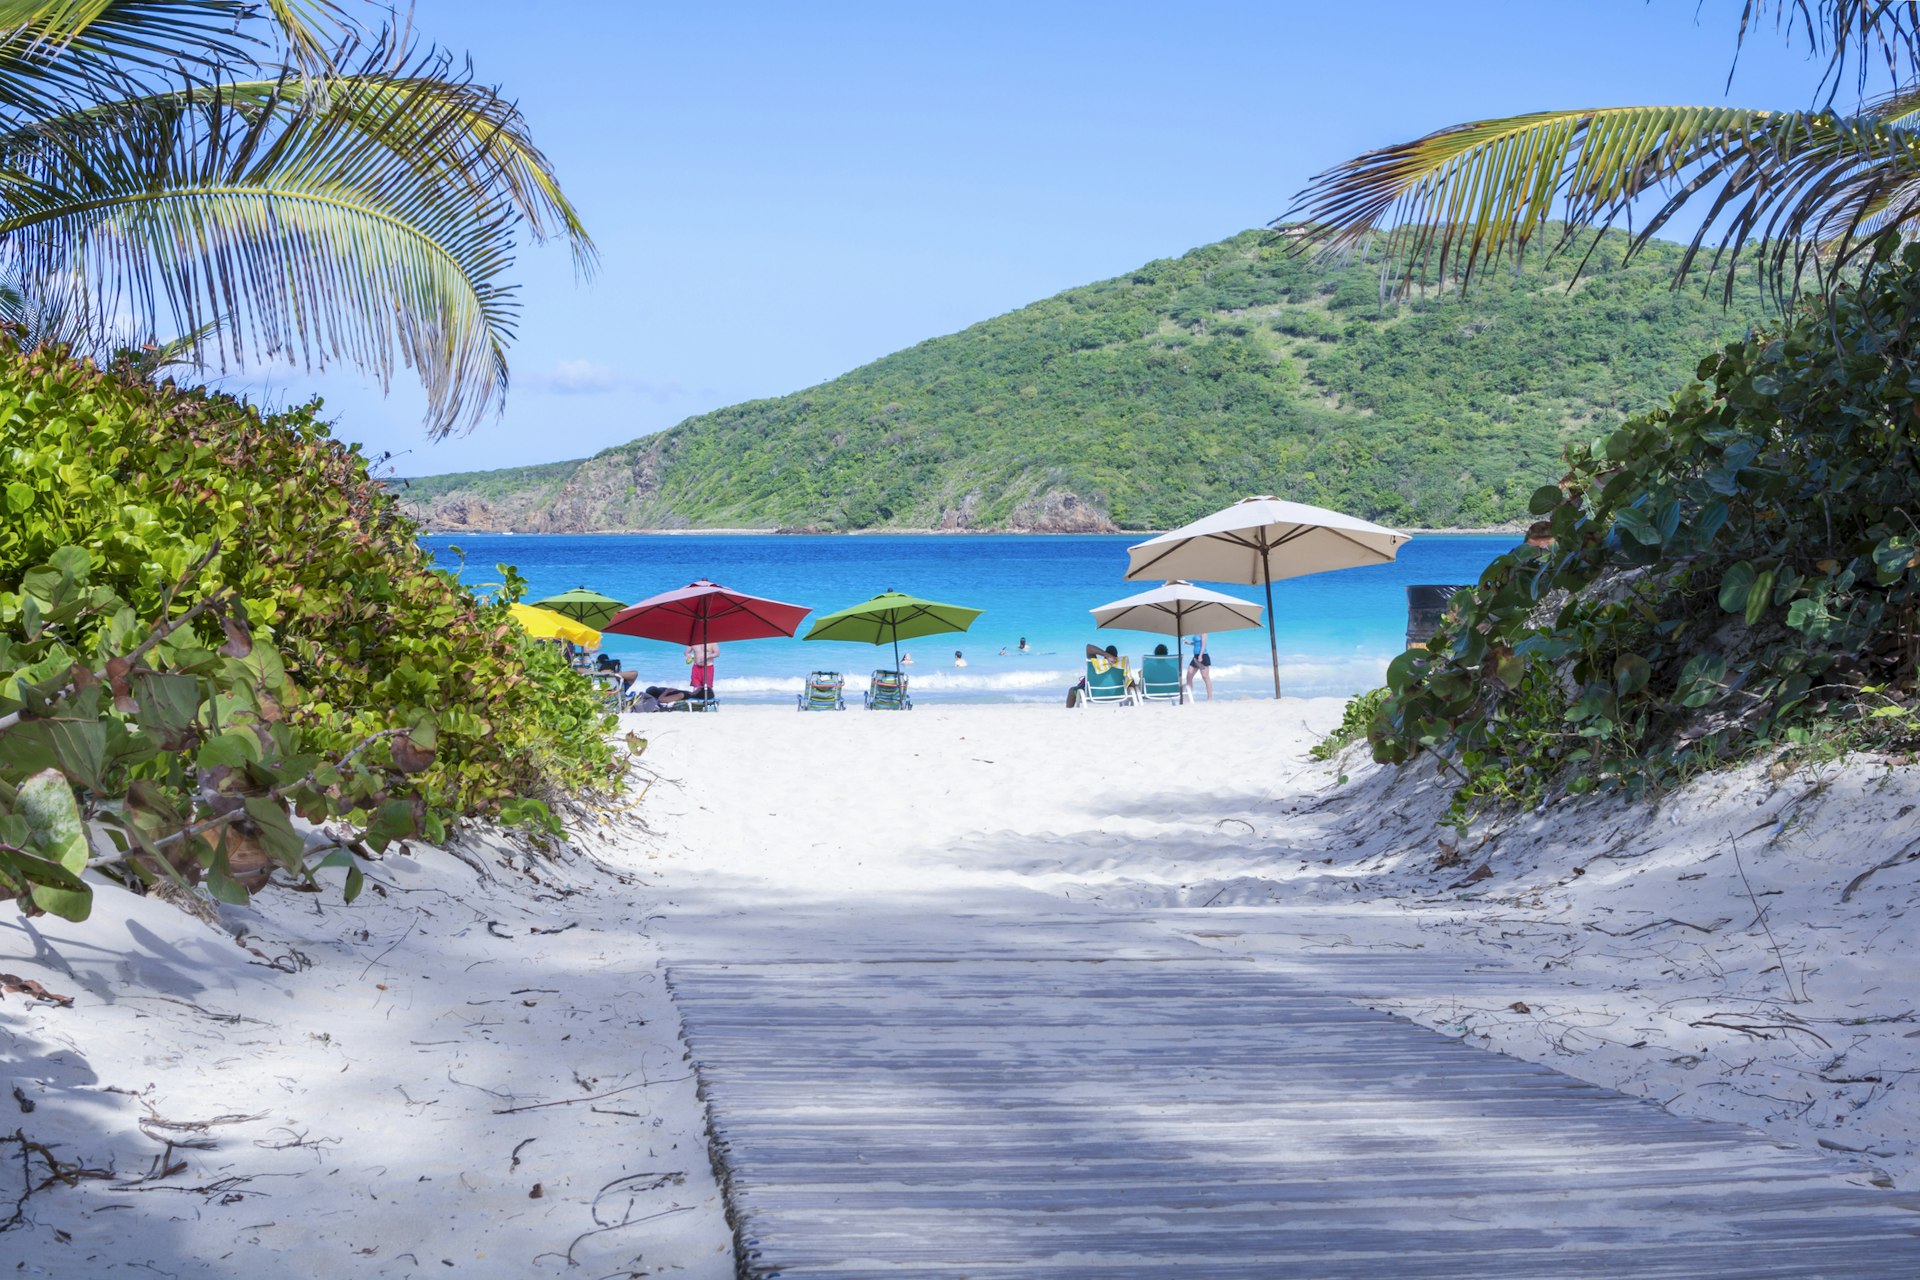 A wooden boardwalk dusted with white sand leads down to a beach where people relax under colorful umbrellas on the island of Culebra, Puerto Rico